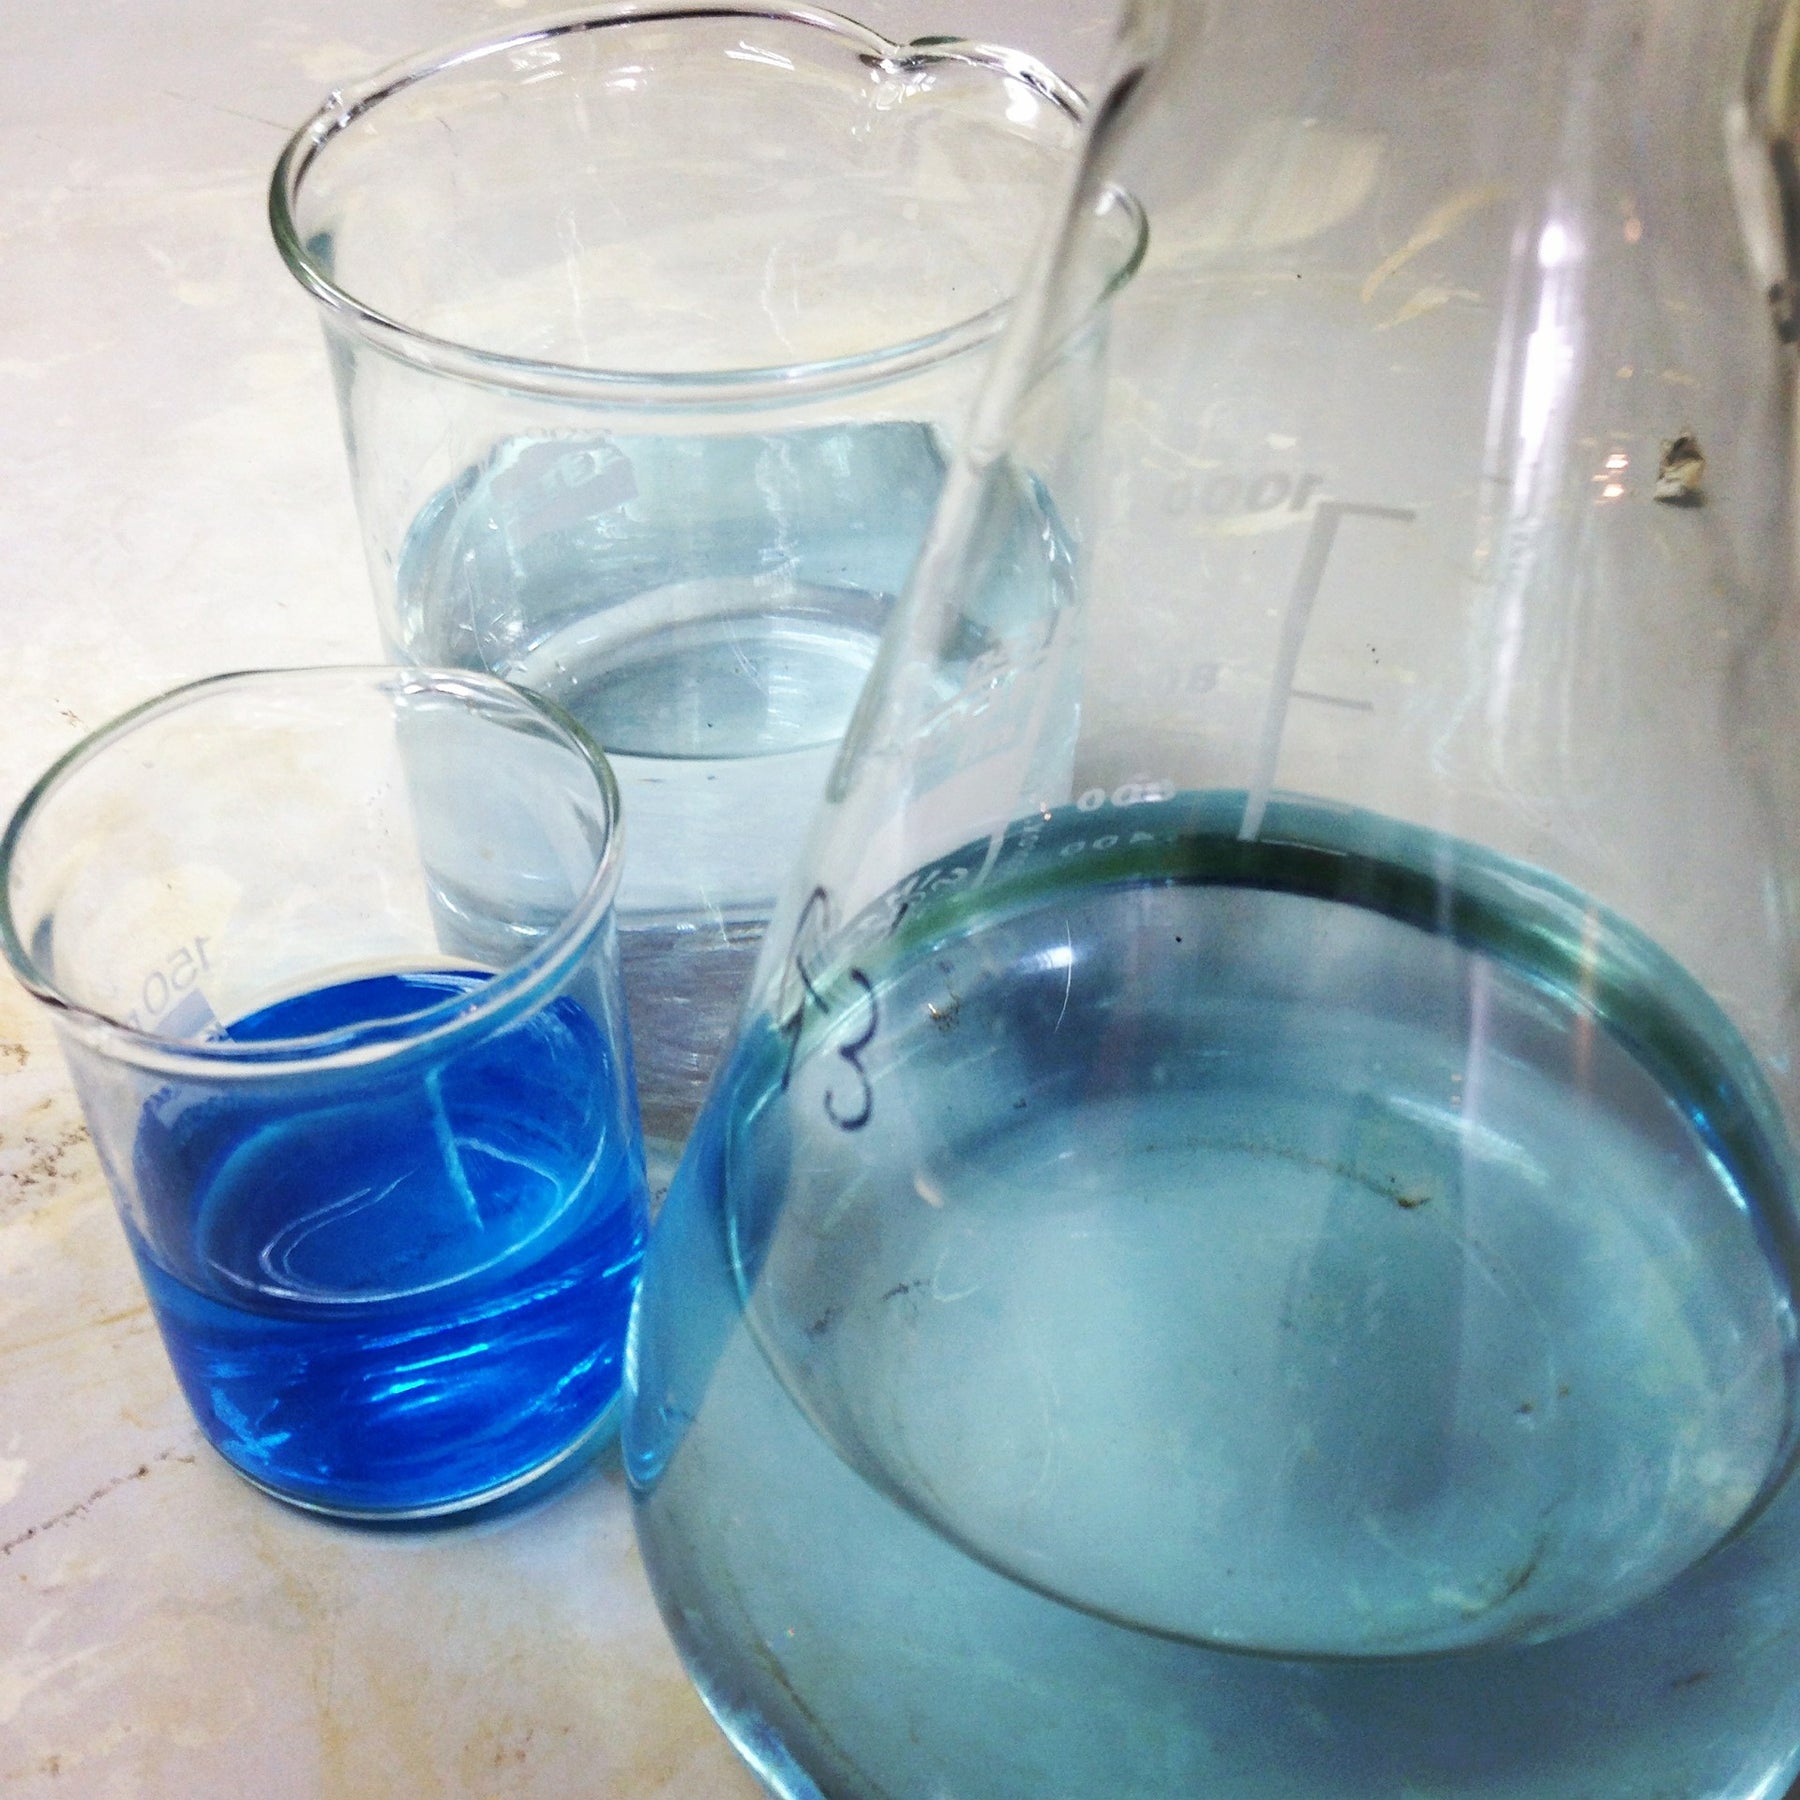 Three glass containers with blue liquid